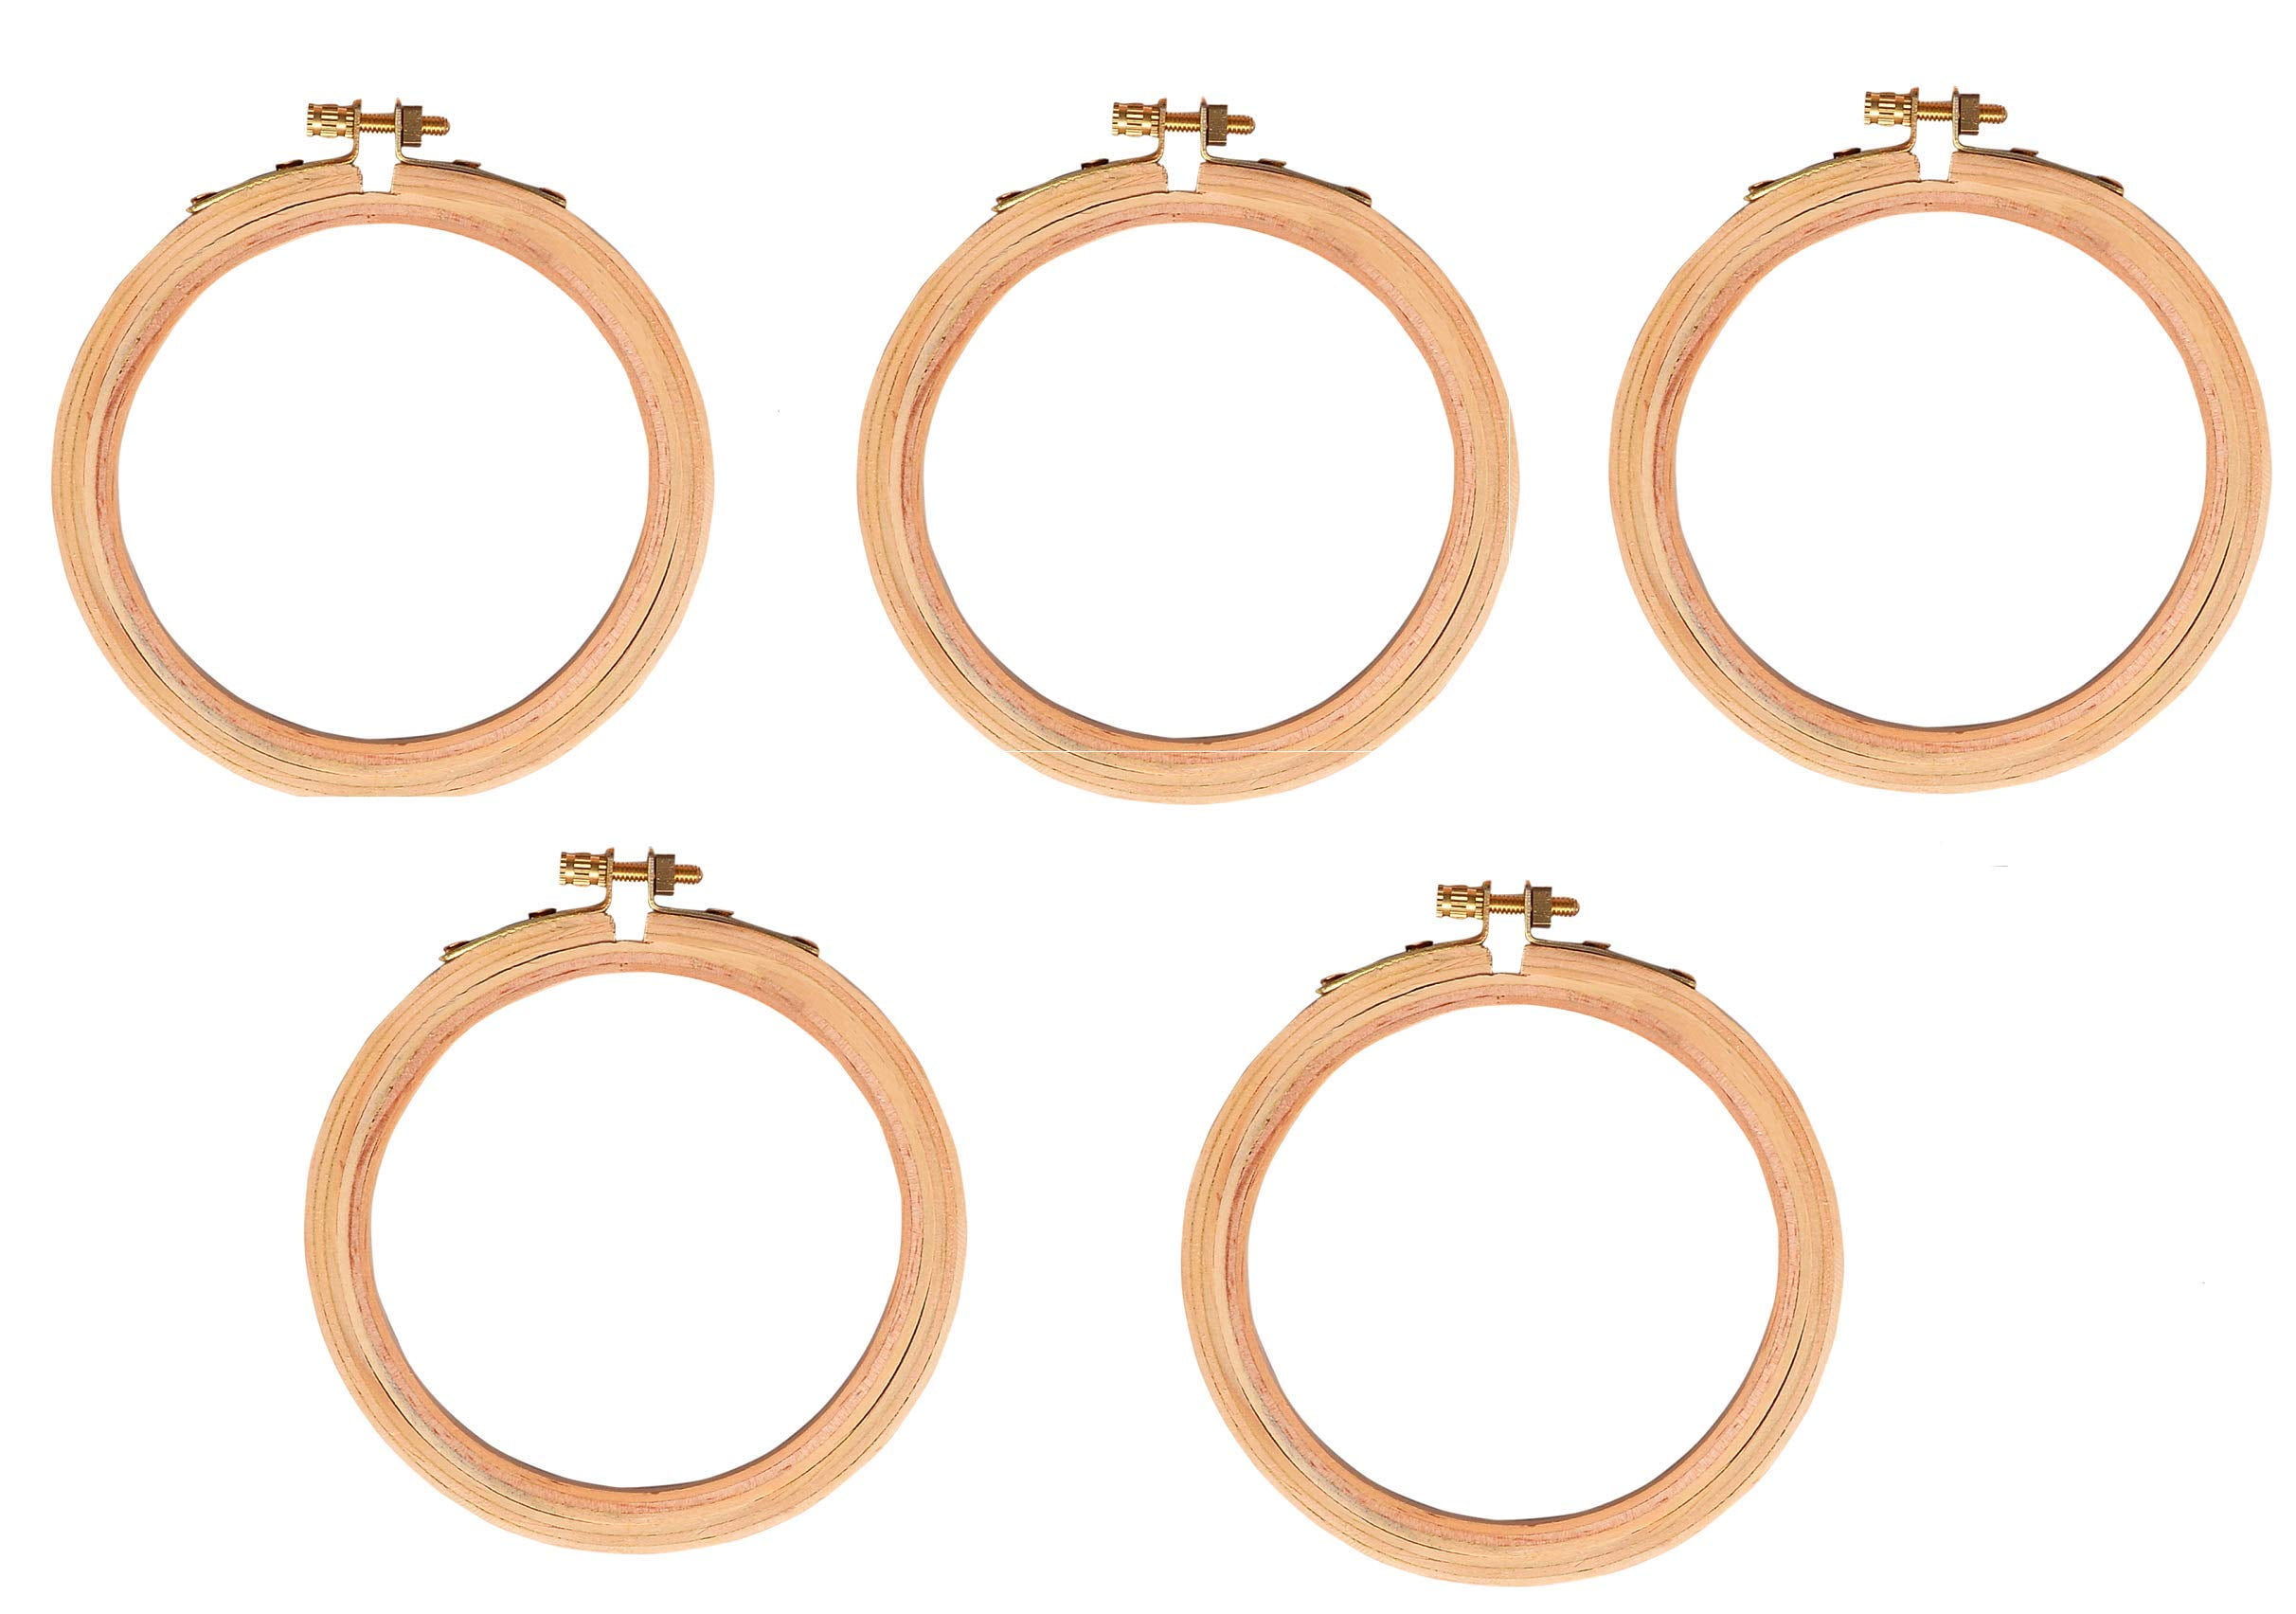 Wooden Embroidery Hoop Ring Frame (5 Pieces) For Design Making for Dresses  | eBay